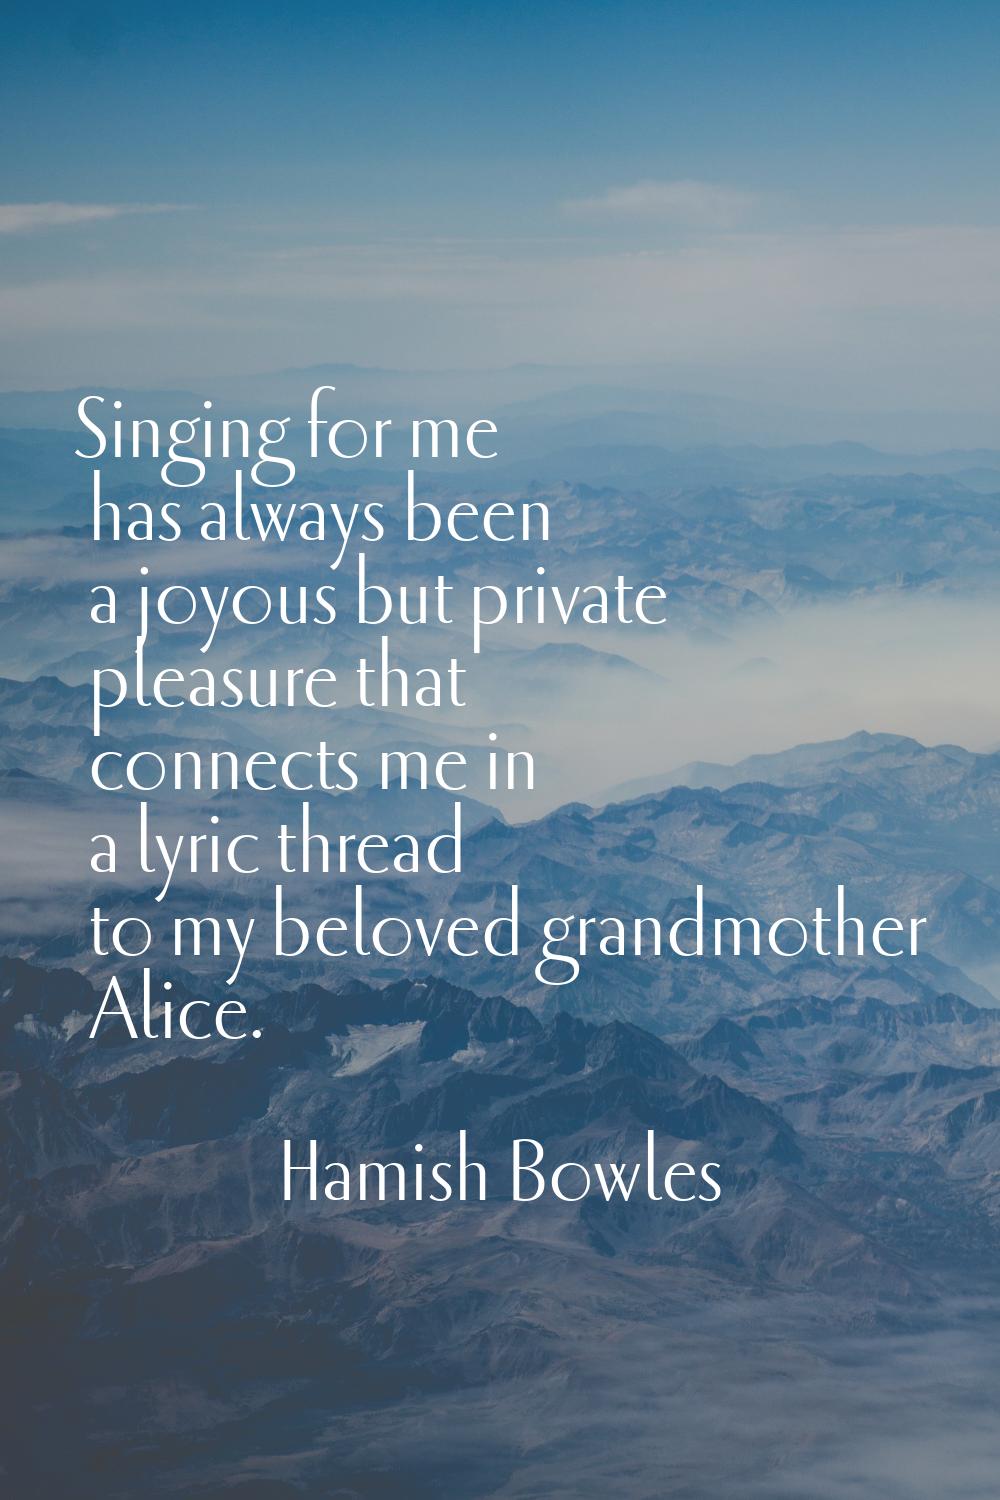 Singing for me has always been a joyous but private pleasure that connects me in a lyric thread to 